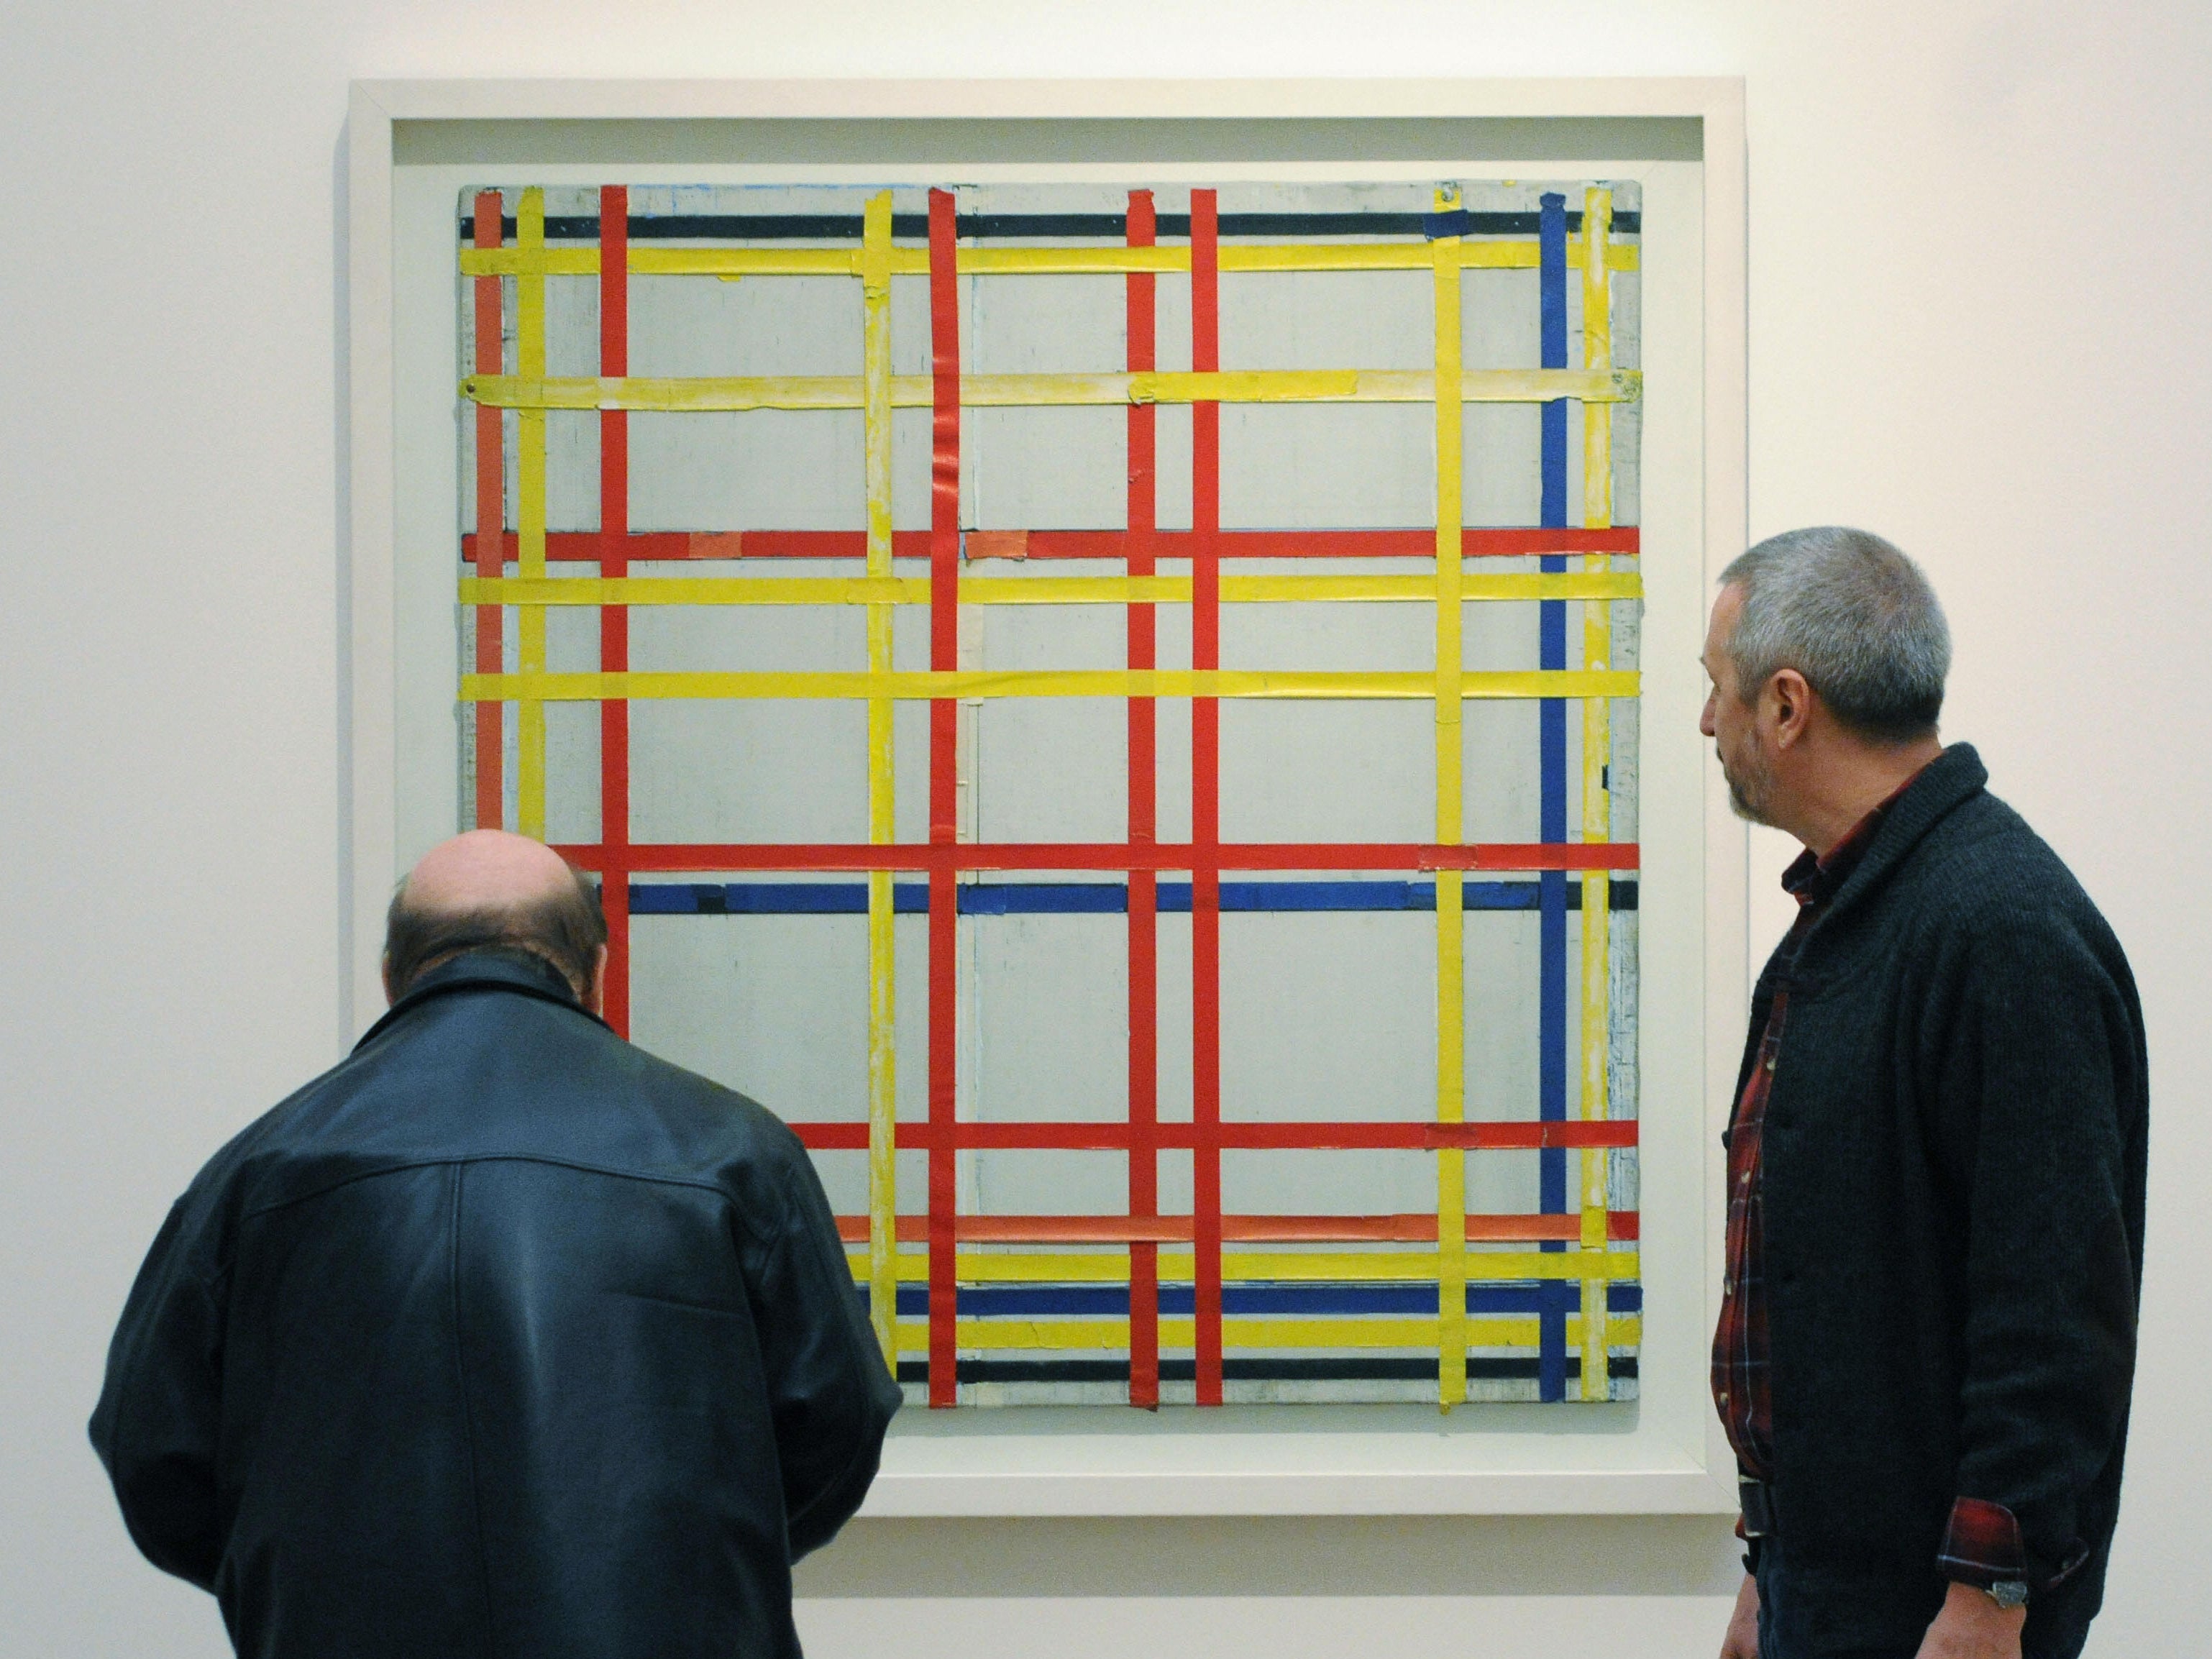 Two visitors look at ‘New York City 1 (unfinished)’ by Piet Mondrian at the Museum Ludwig in Cologne, western Germany